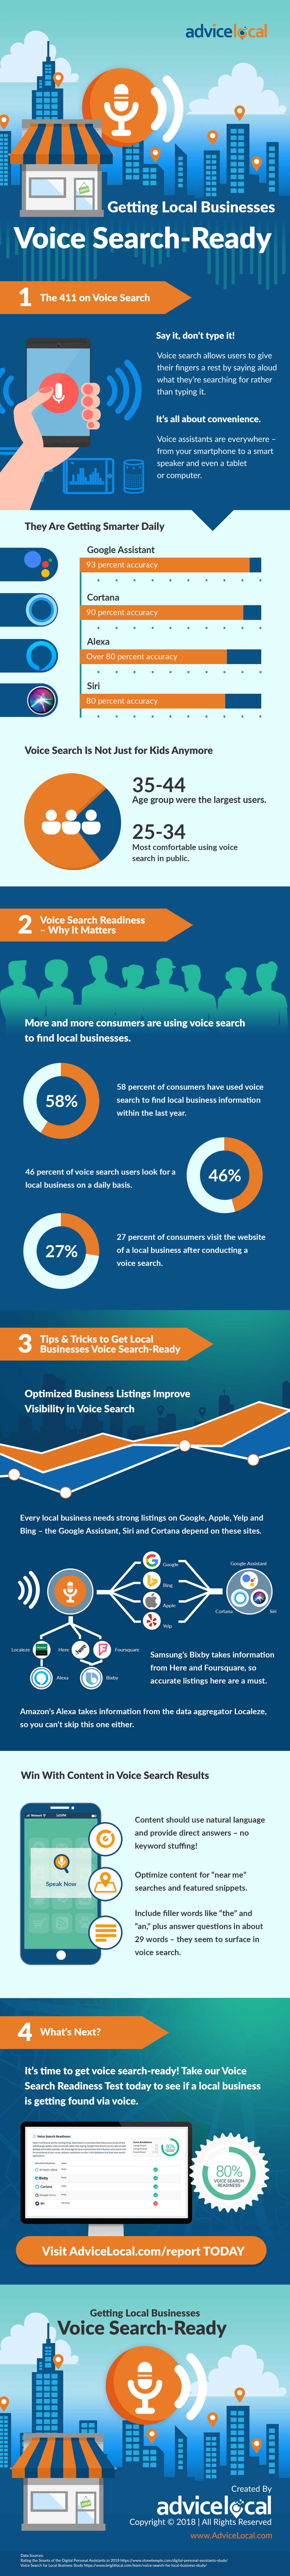 Getting Local Businesses Voice Search-Ready